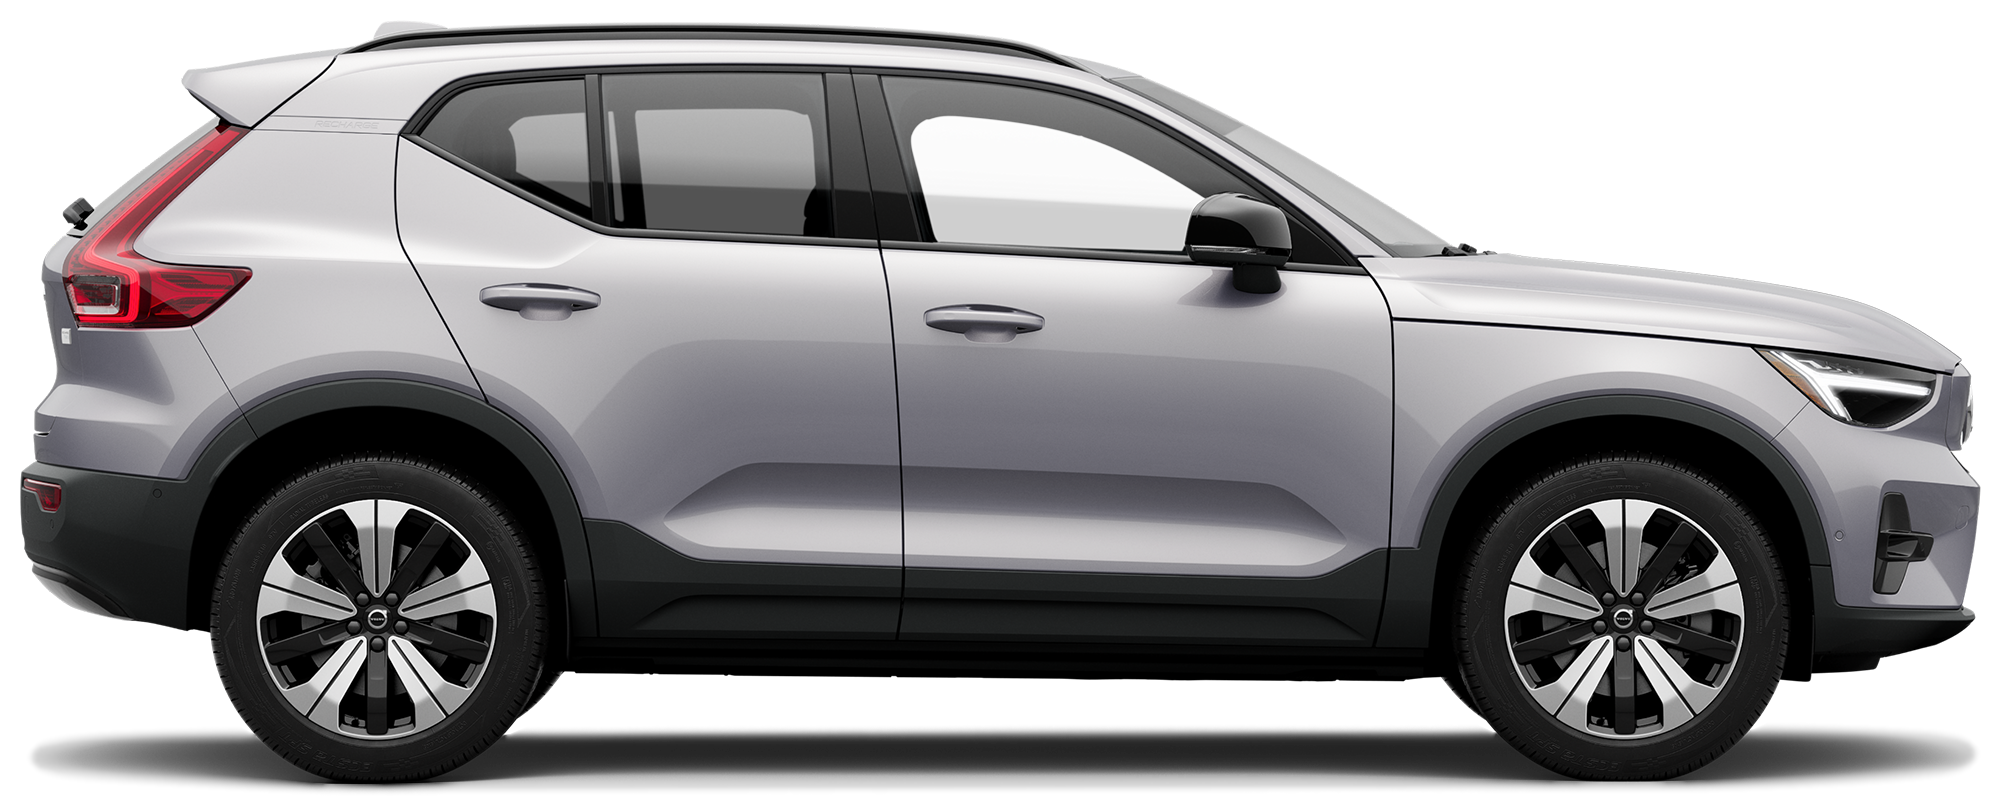 http://images.dealer.com/ddc/vehicles/2023/Volvo/XC40%20Recharge%20Pure%20Electric/SUV/trim_Twin_Plus_b927c3/perspective/side-right/2023_76.png